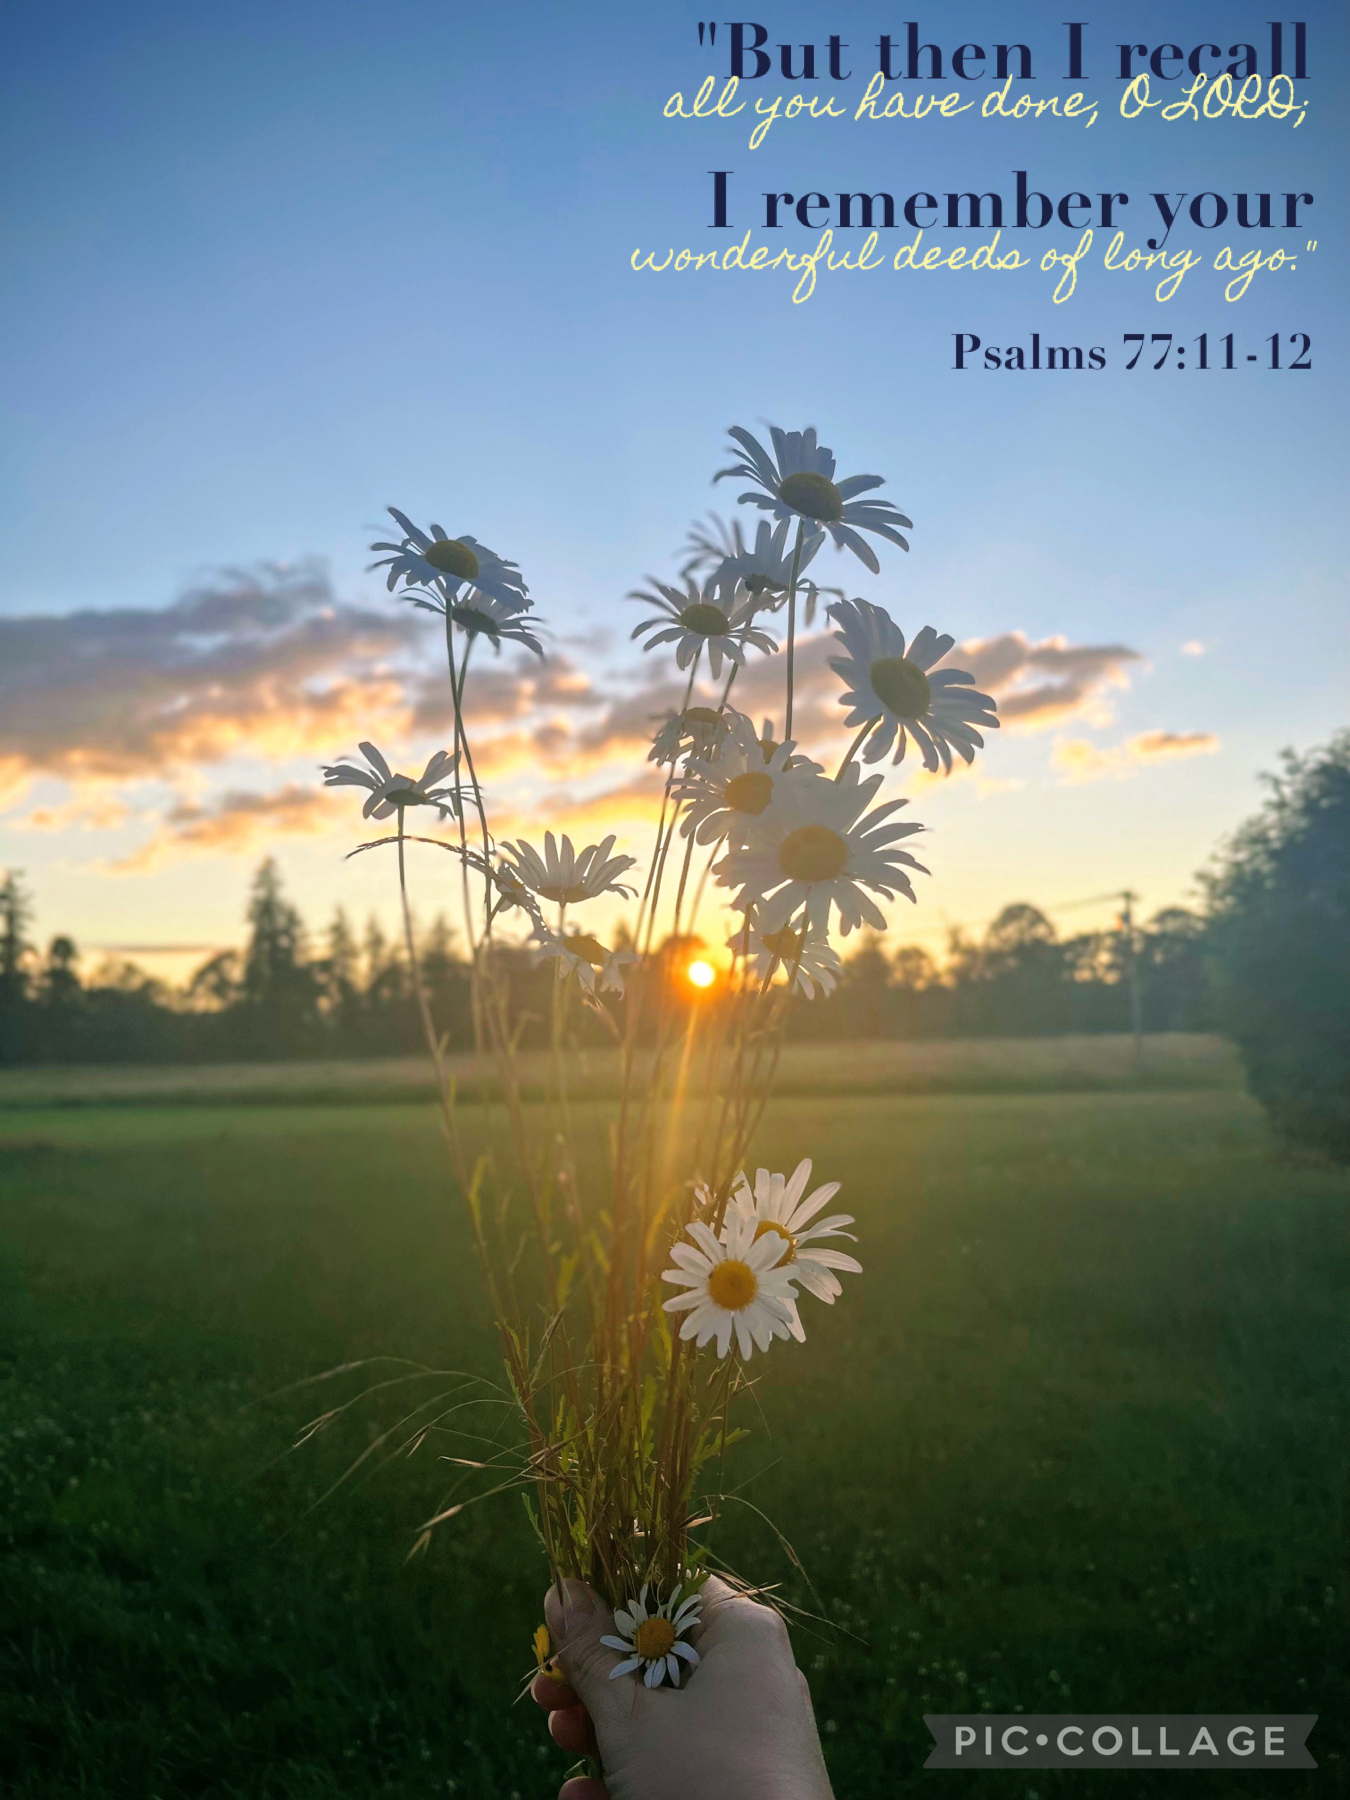 🌻✨tap✨🌻
There's not a daisy emoji so i had to settle for a sunflower😒I took this a couple weeks back in my ginormous backyard. Mom had found some wild daisies growing somewhere and plucked em, and i had her hold em up to the sunset so i could take a pic o